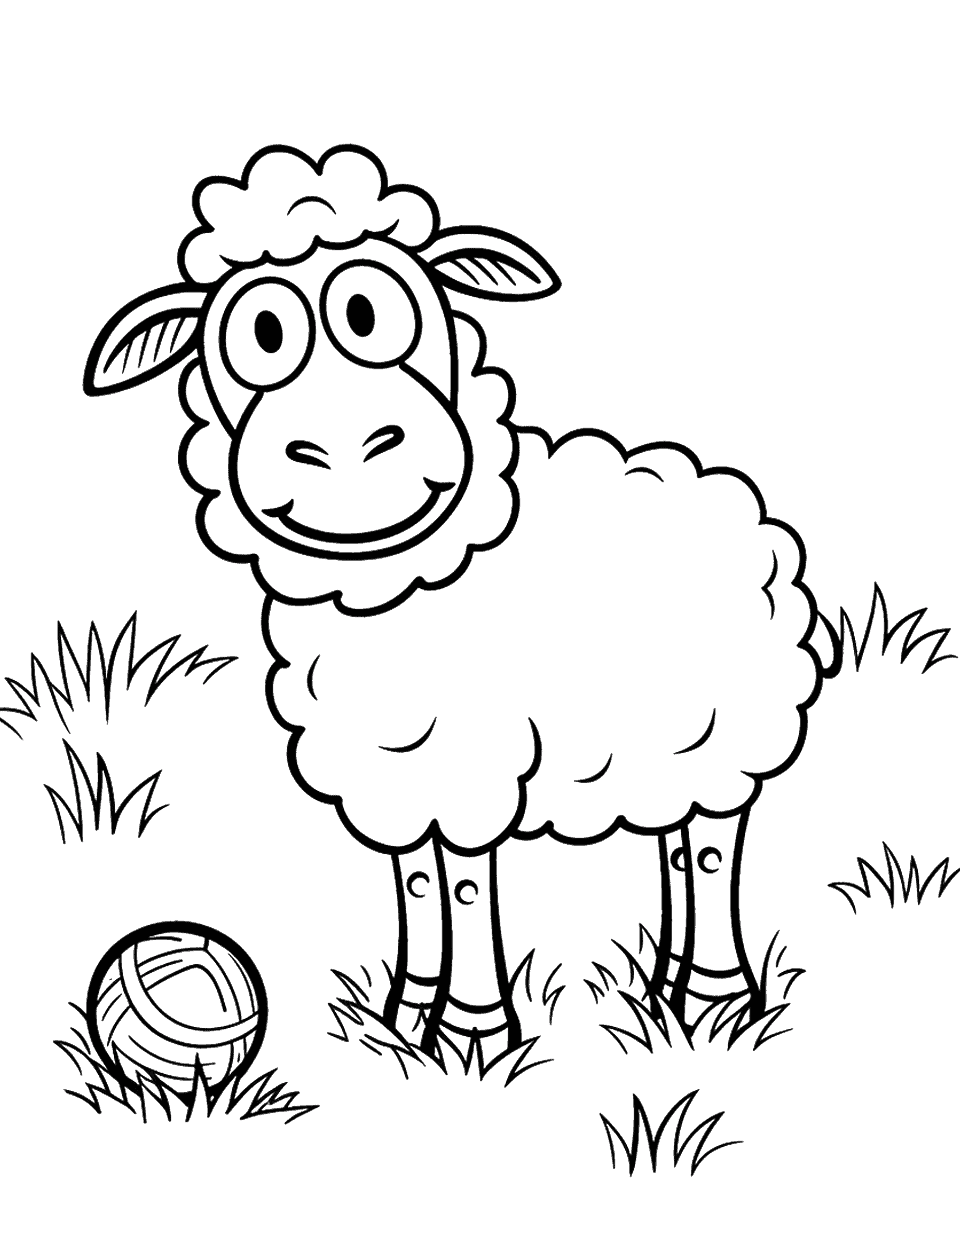 Shaun the Sheep at Play Coloring Page - The character Shaun the Sheep playing with a ball in a grassy field.